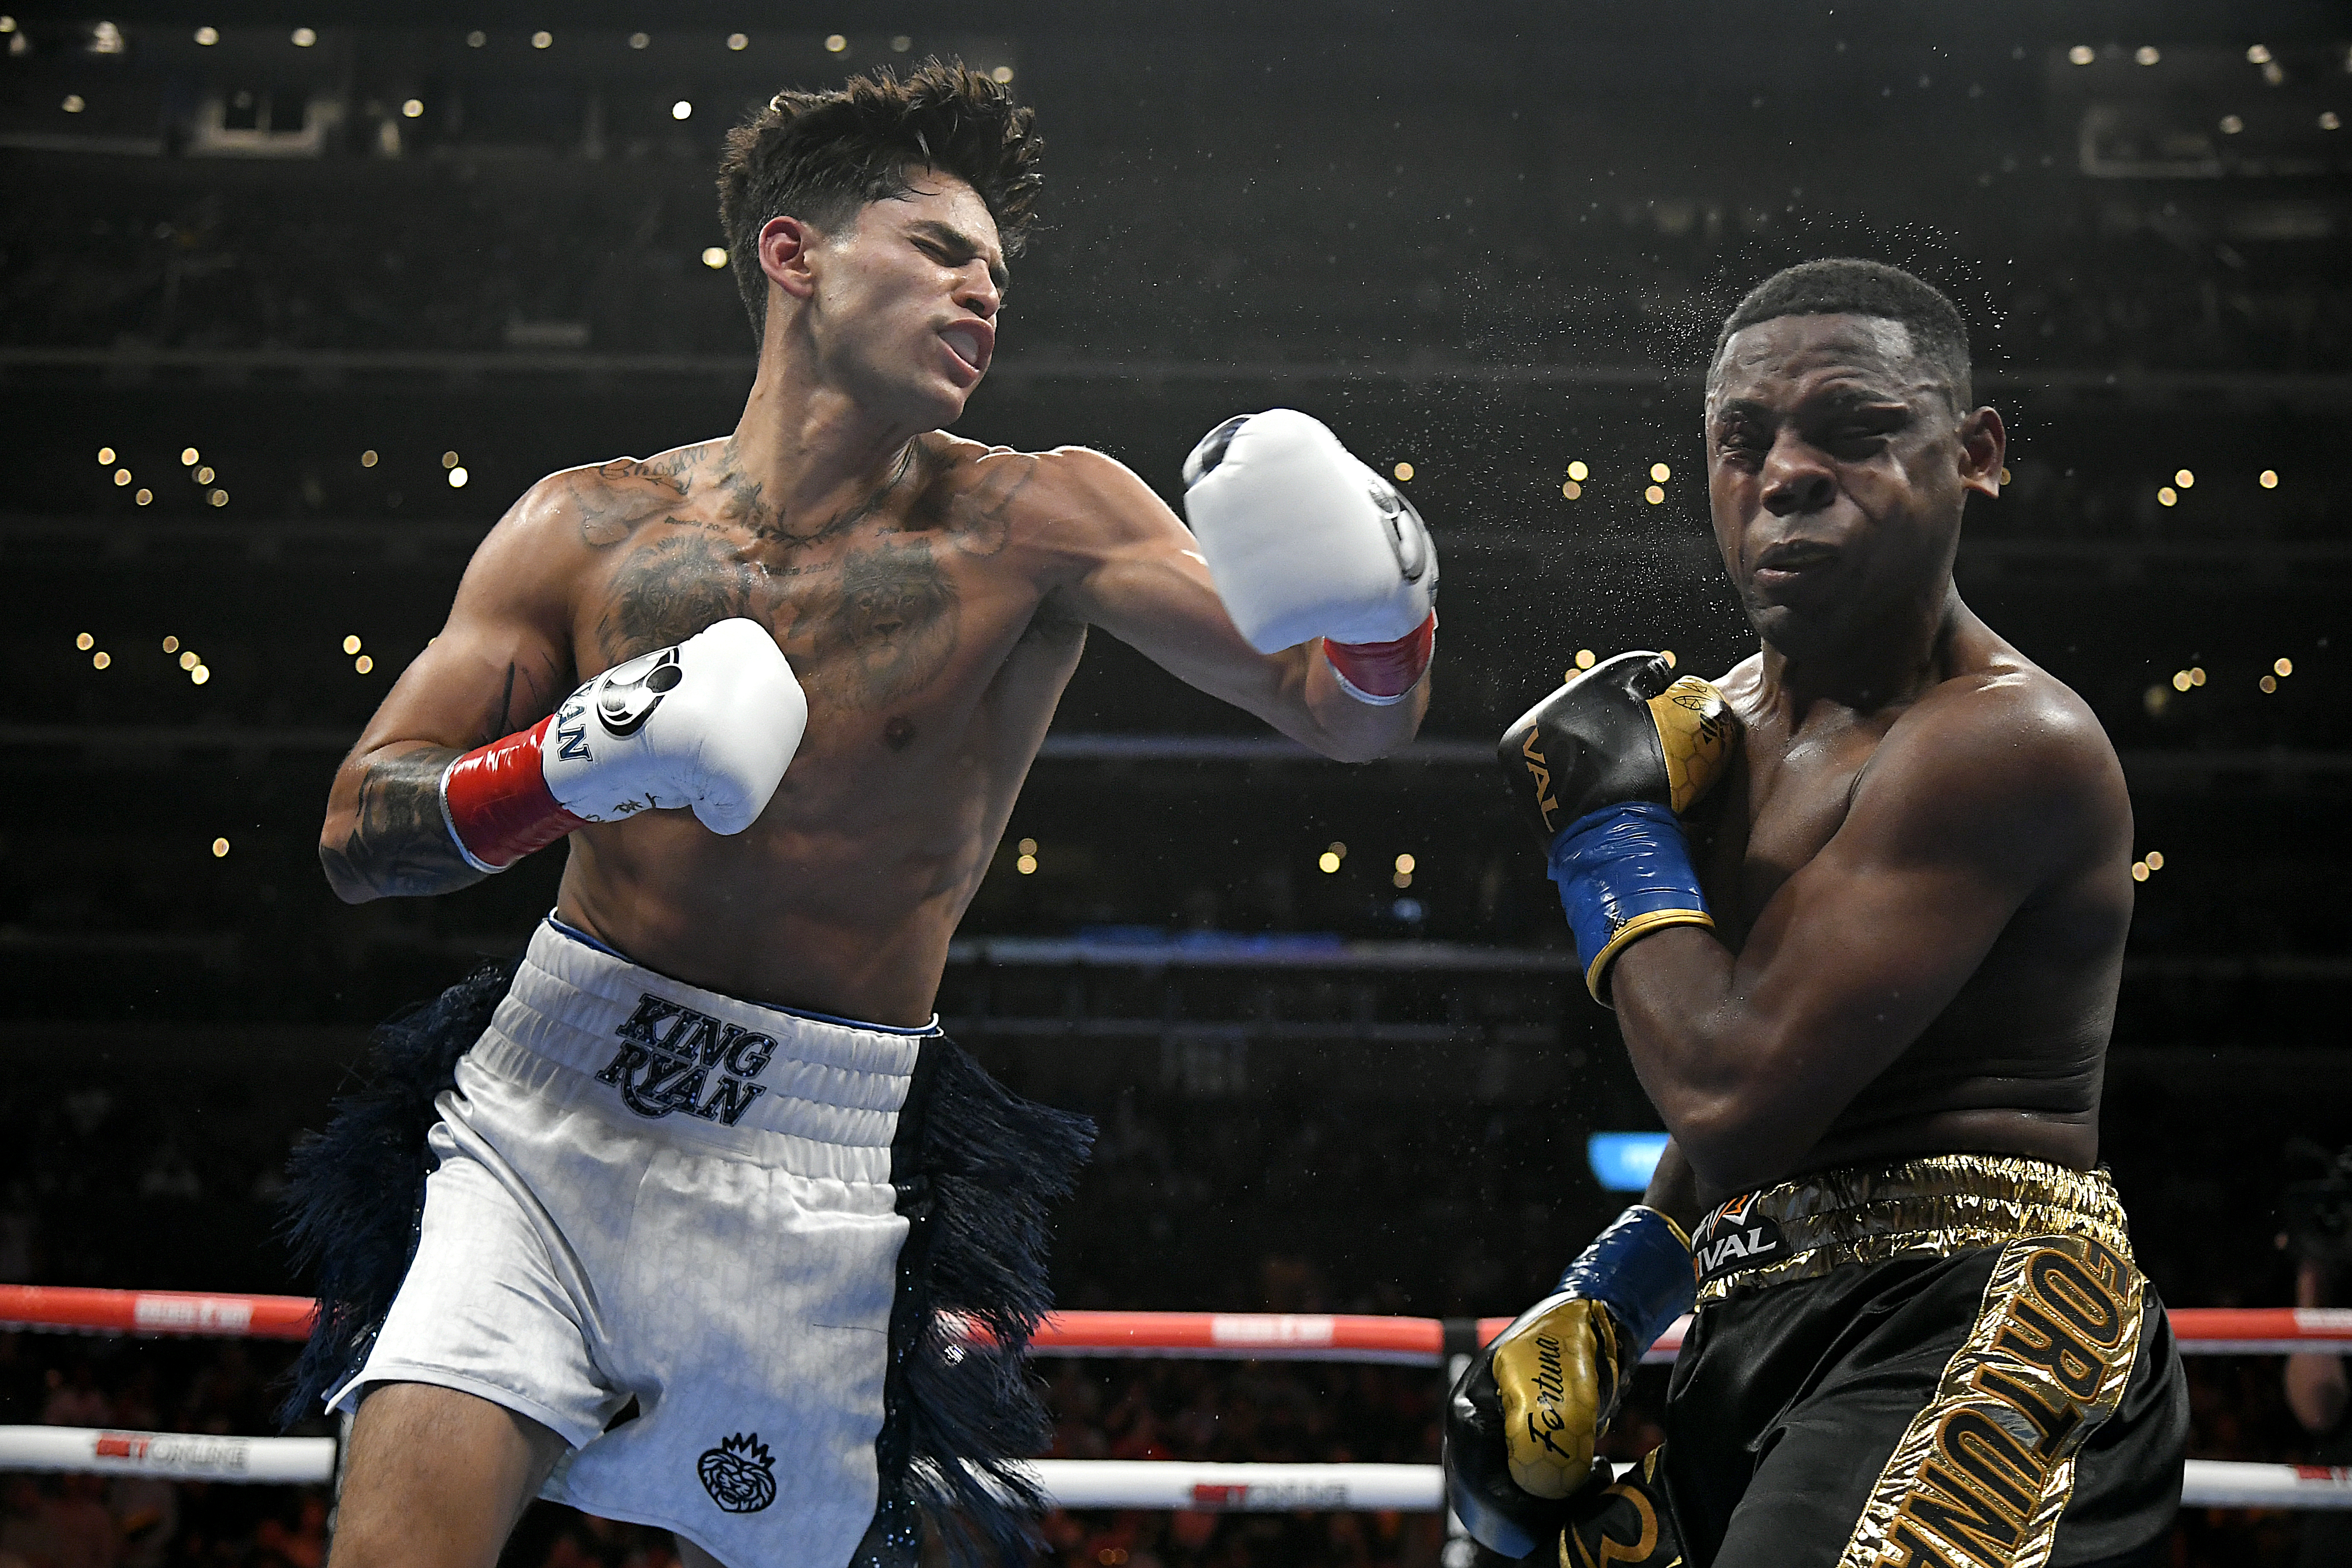 Ryan Garcia had no issues with Javier Fortuna, but may have added another hurdle to making a fight with Gervonta Davis